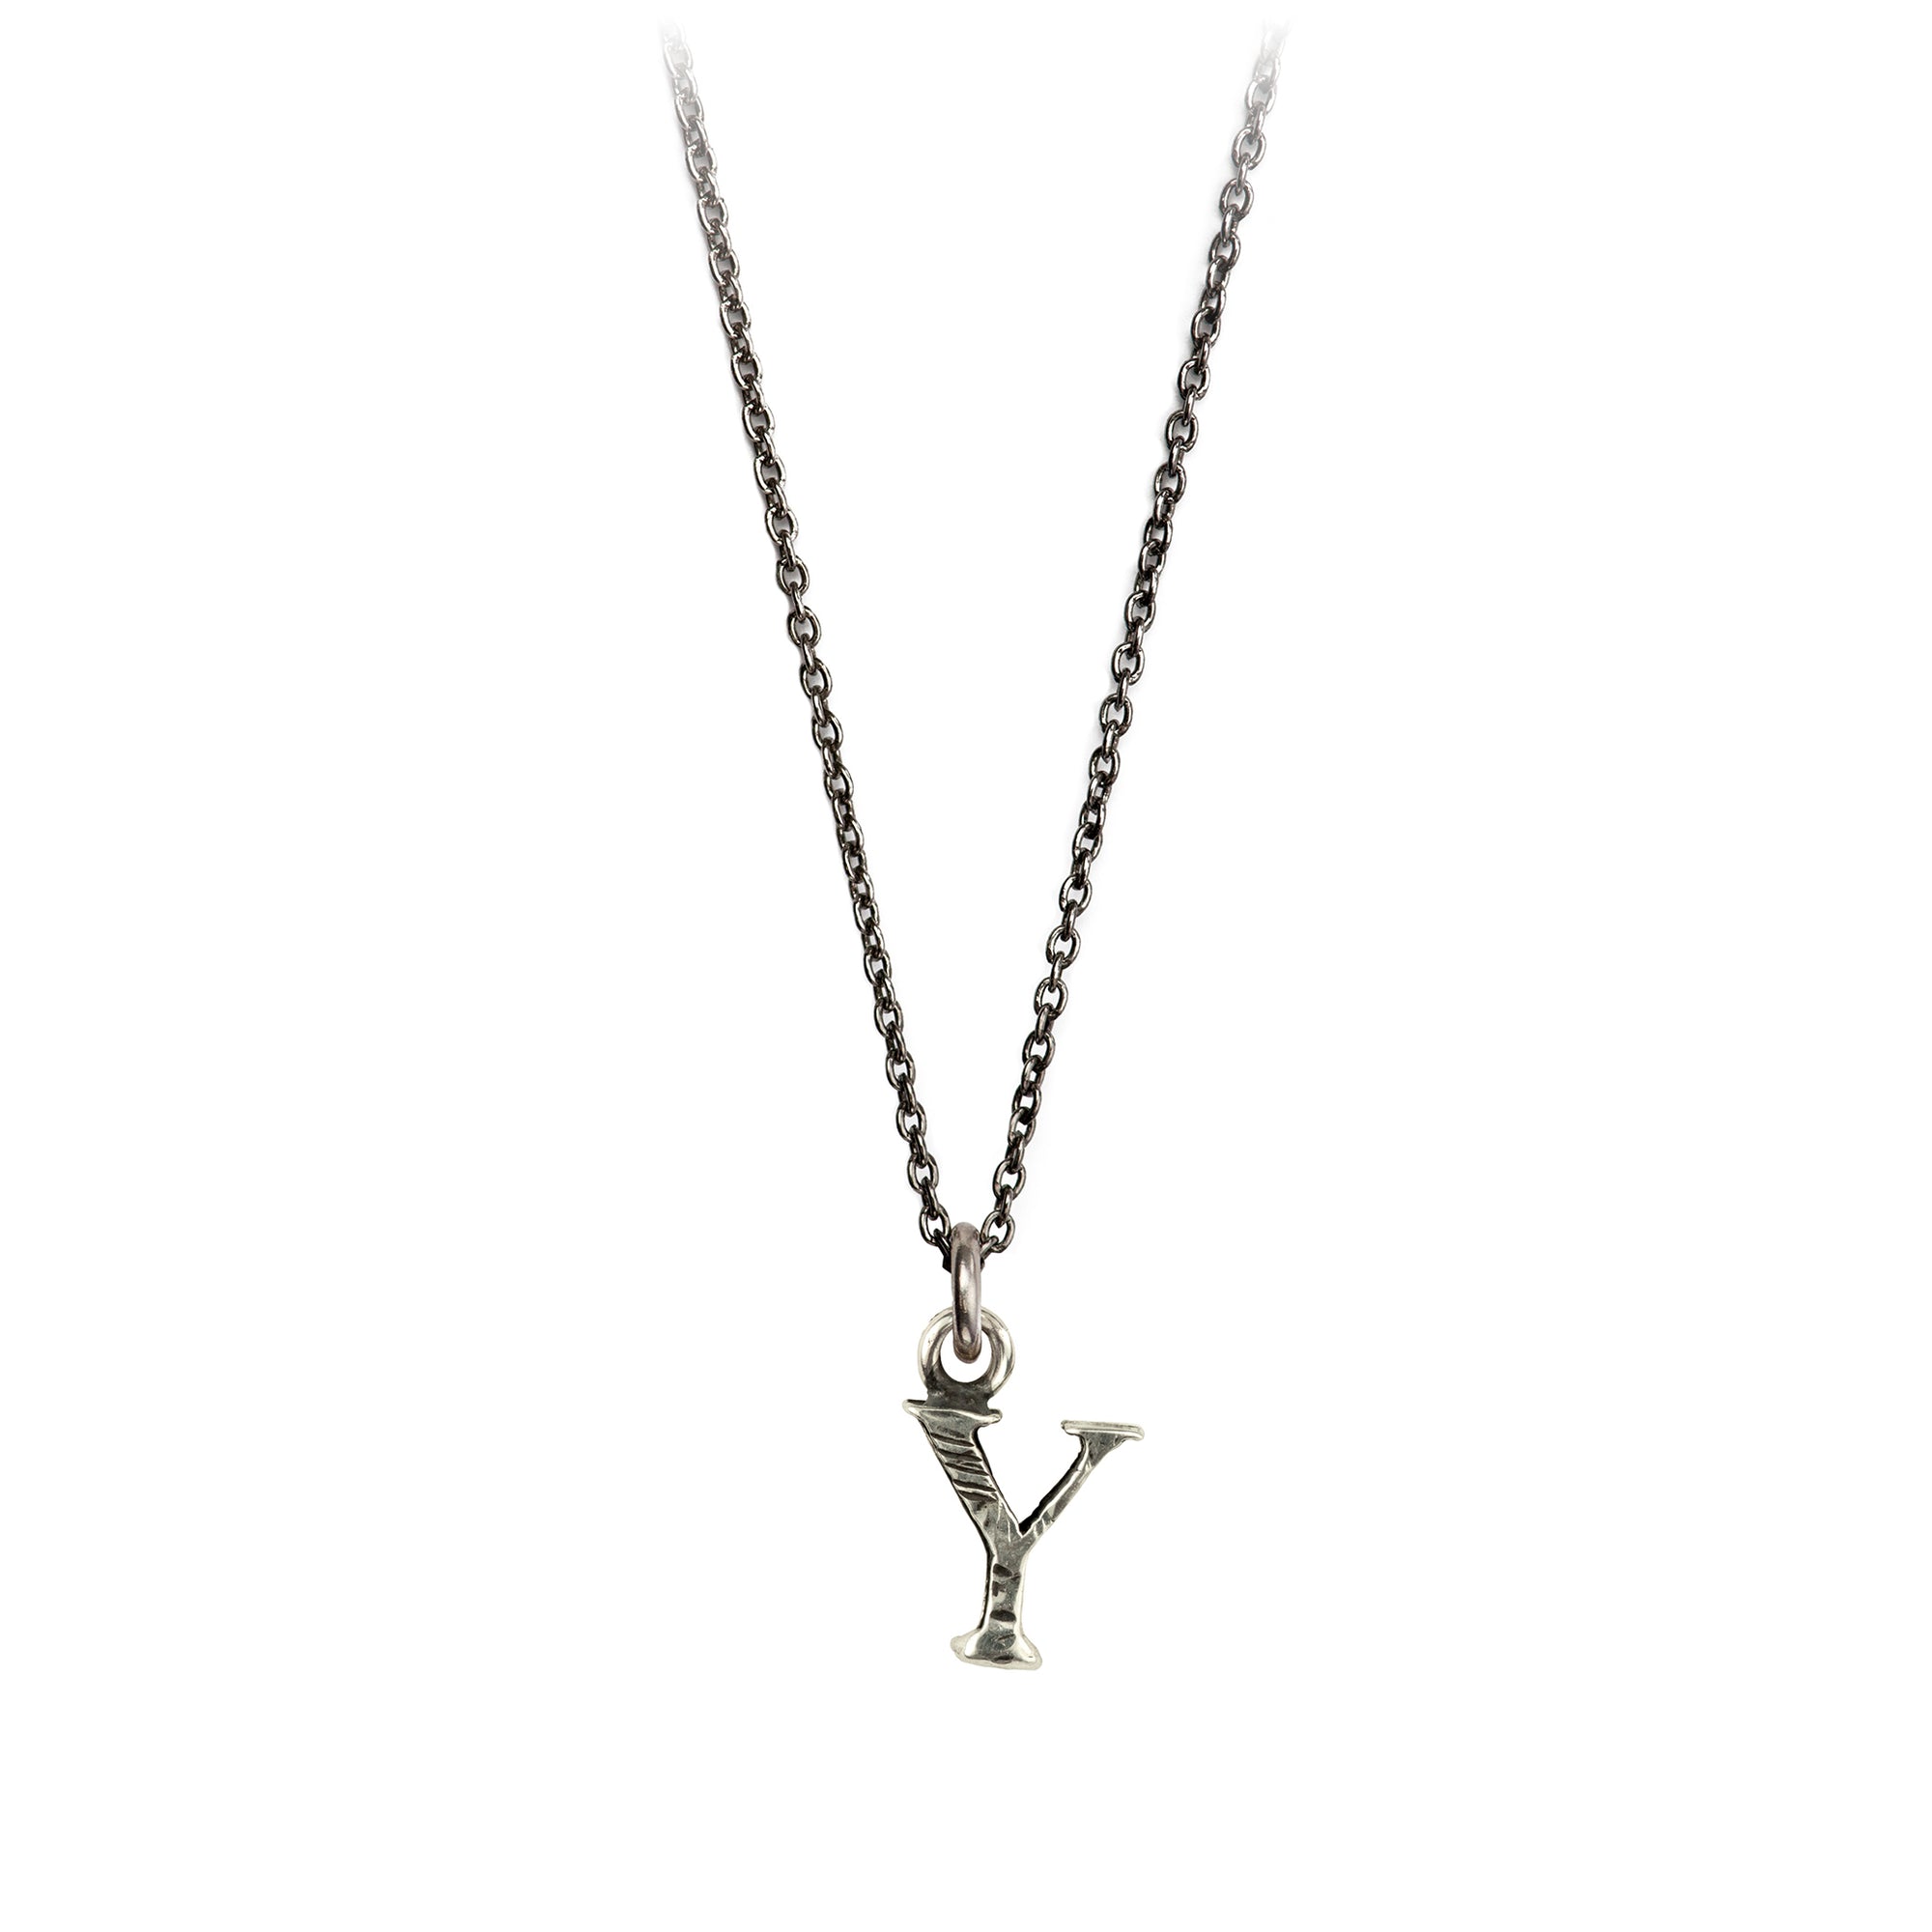 A sterling silver letter "Y" charm on a silver chain.